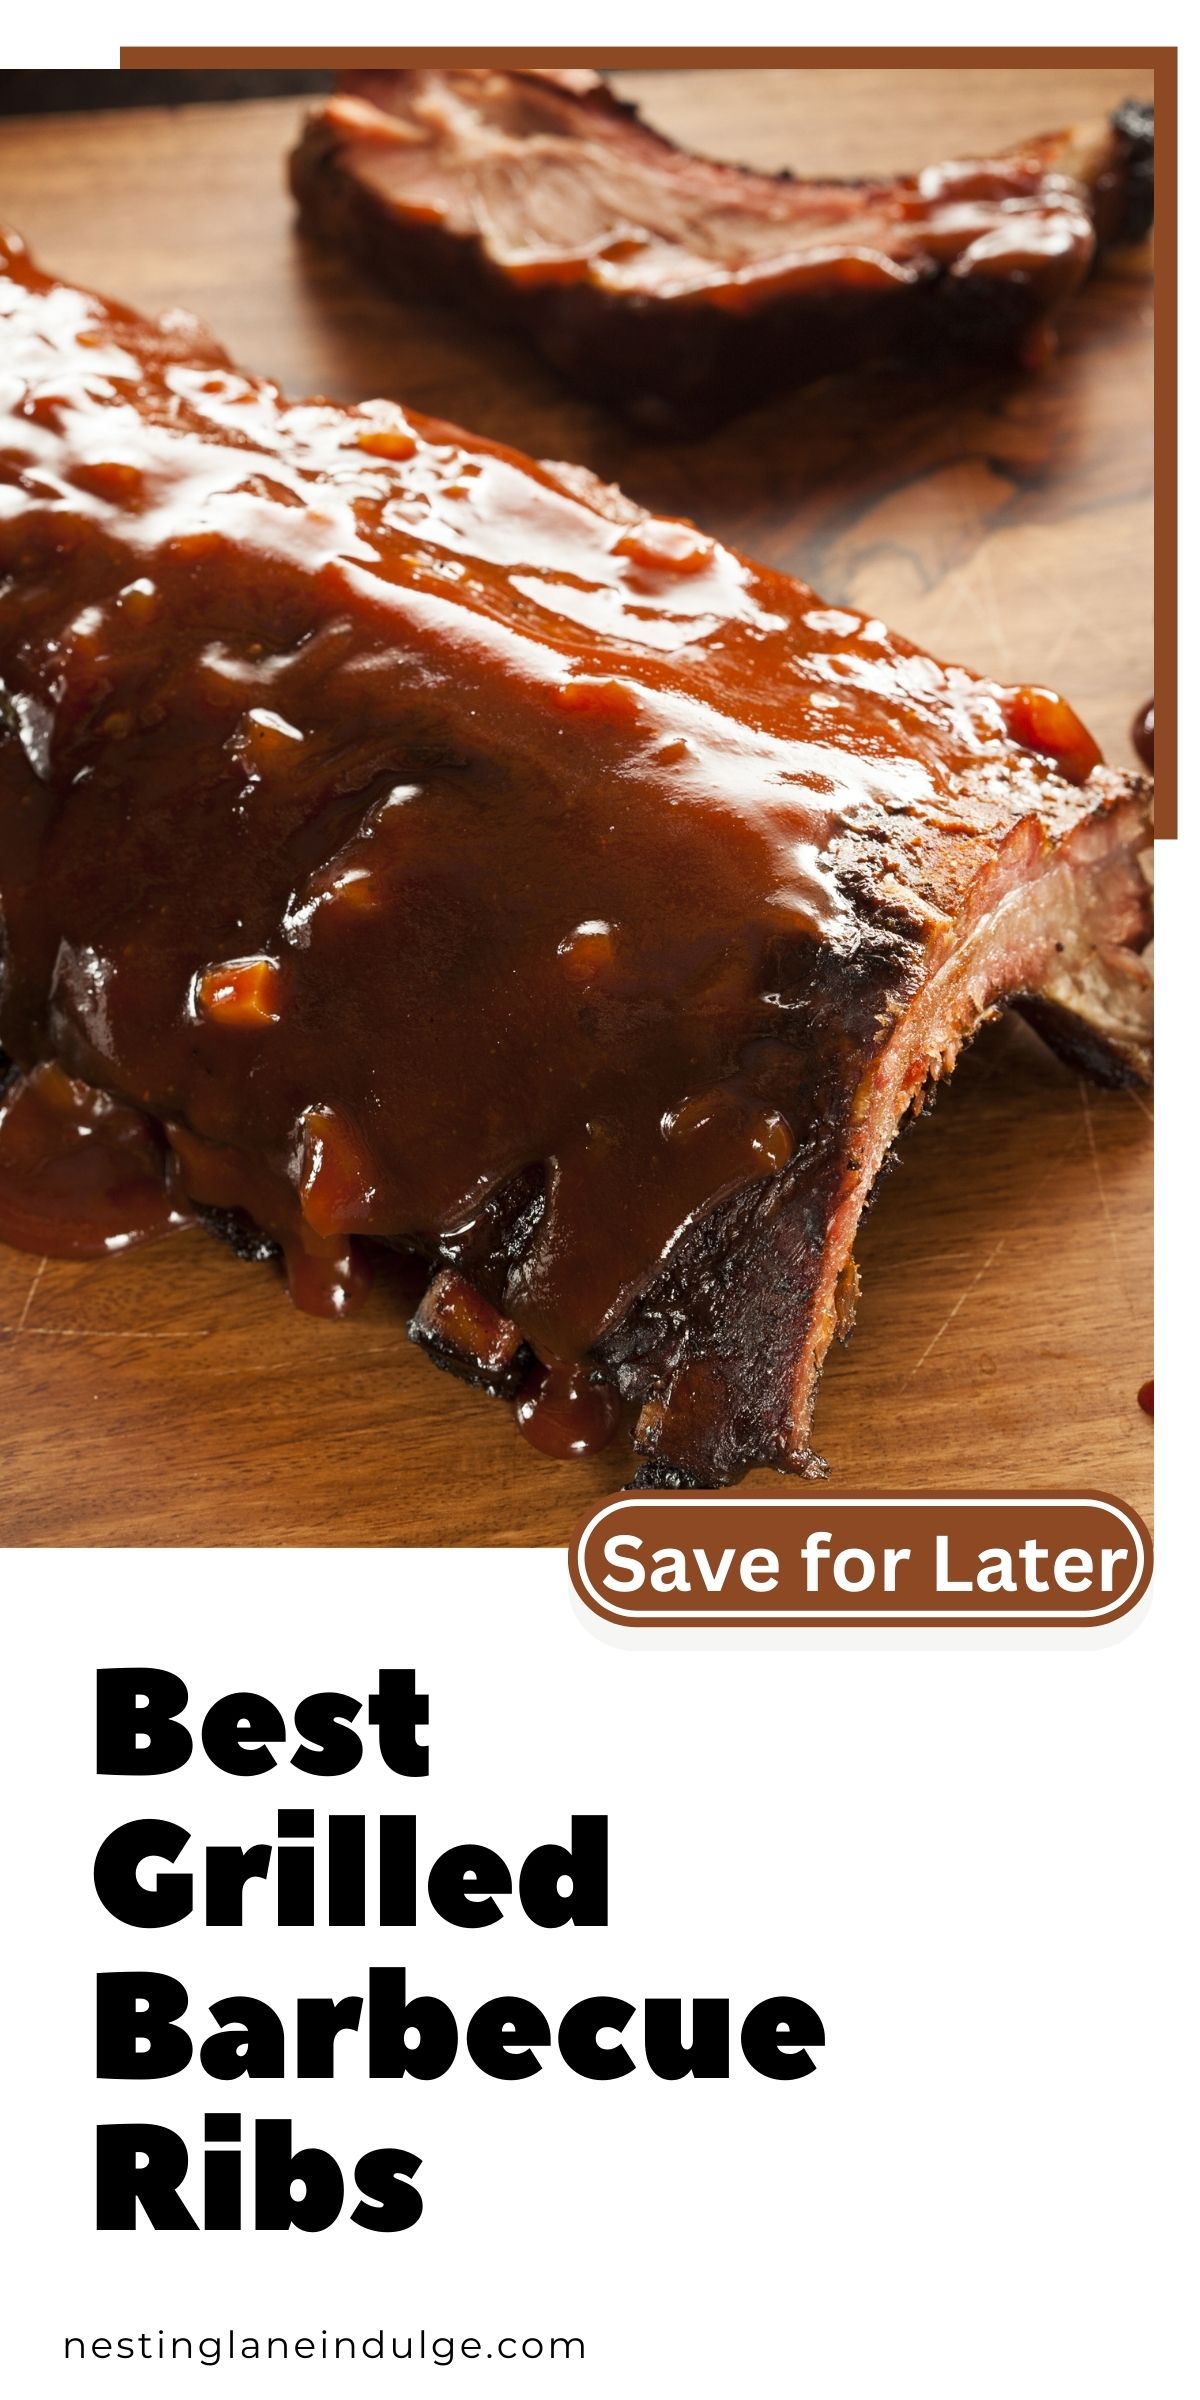 Best Grilled Barbecue Ribs graphic.